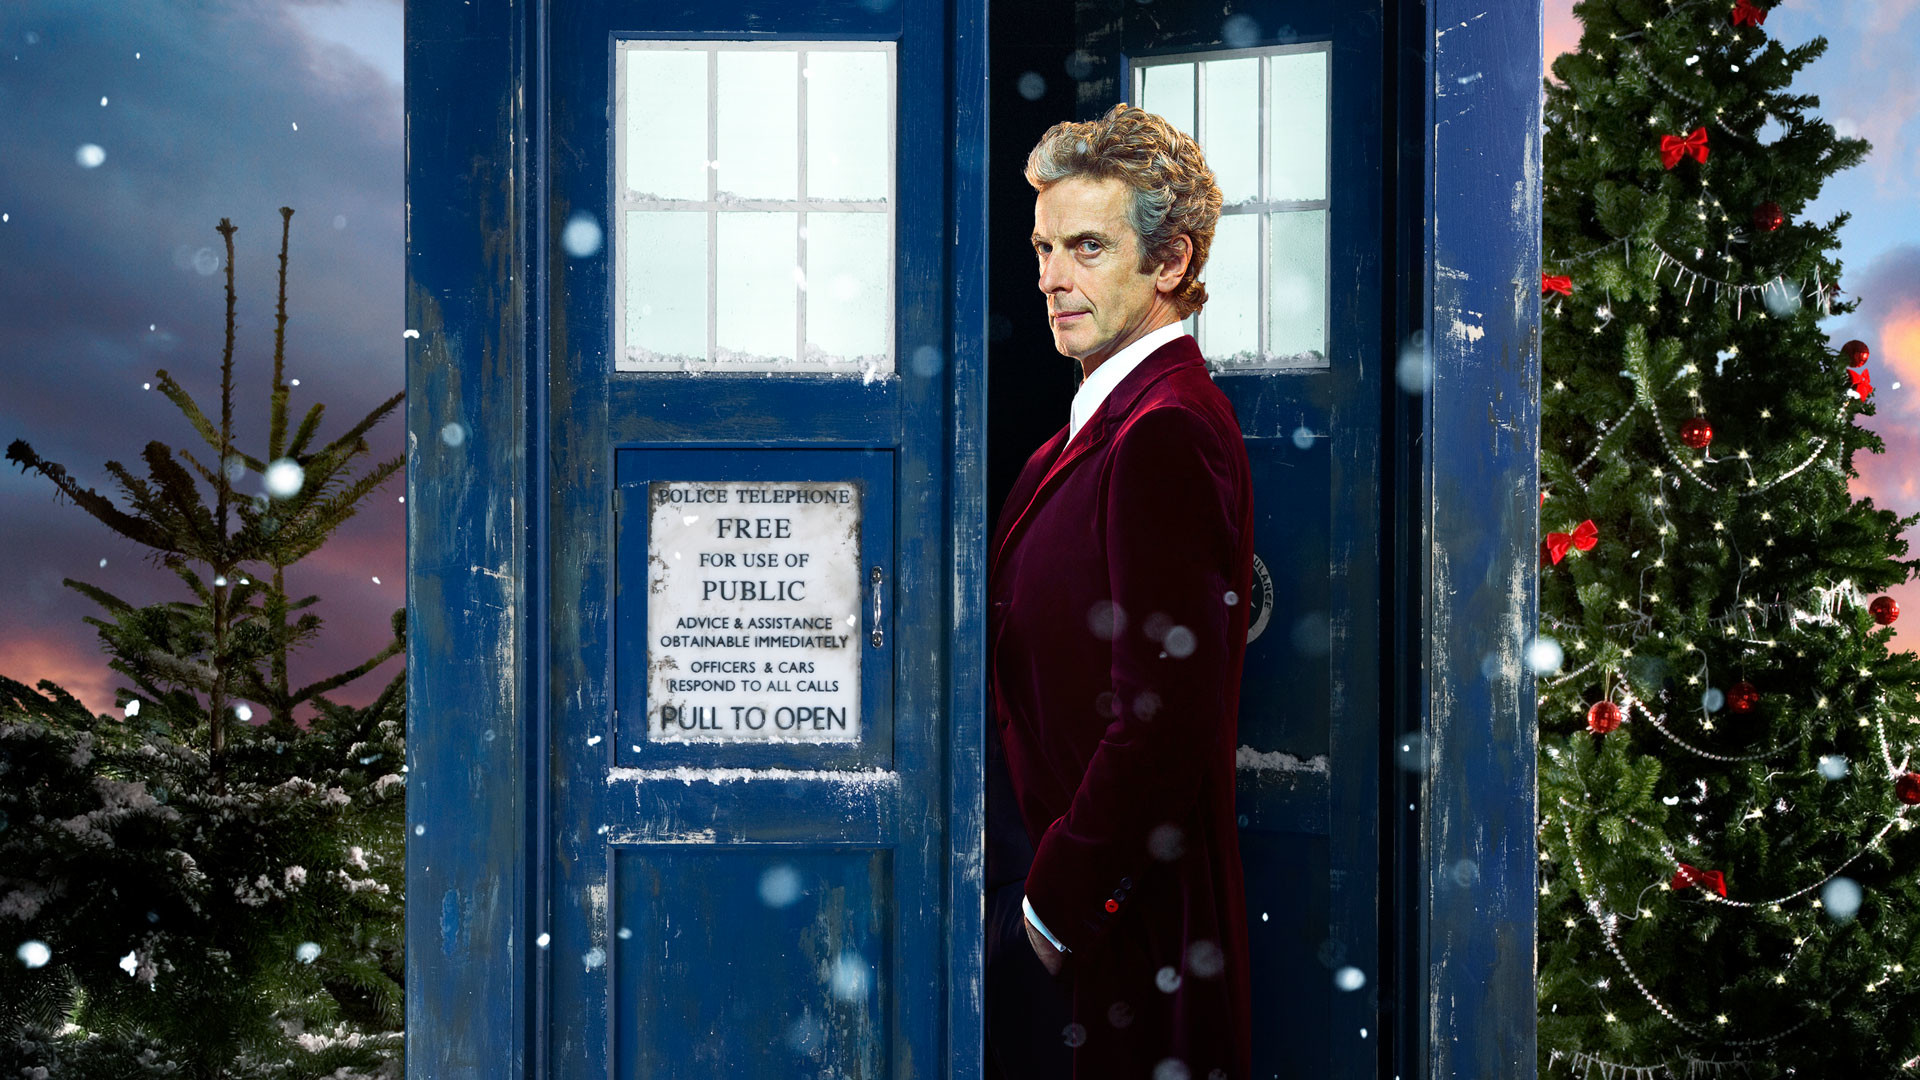 1920x1080 Arts/CraftsA Doctor Who Christmas Wallpaper featuring Peter Capaldi as the  Doctor, nice and early for your desktop!